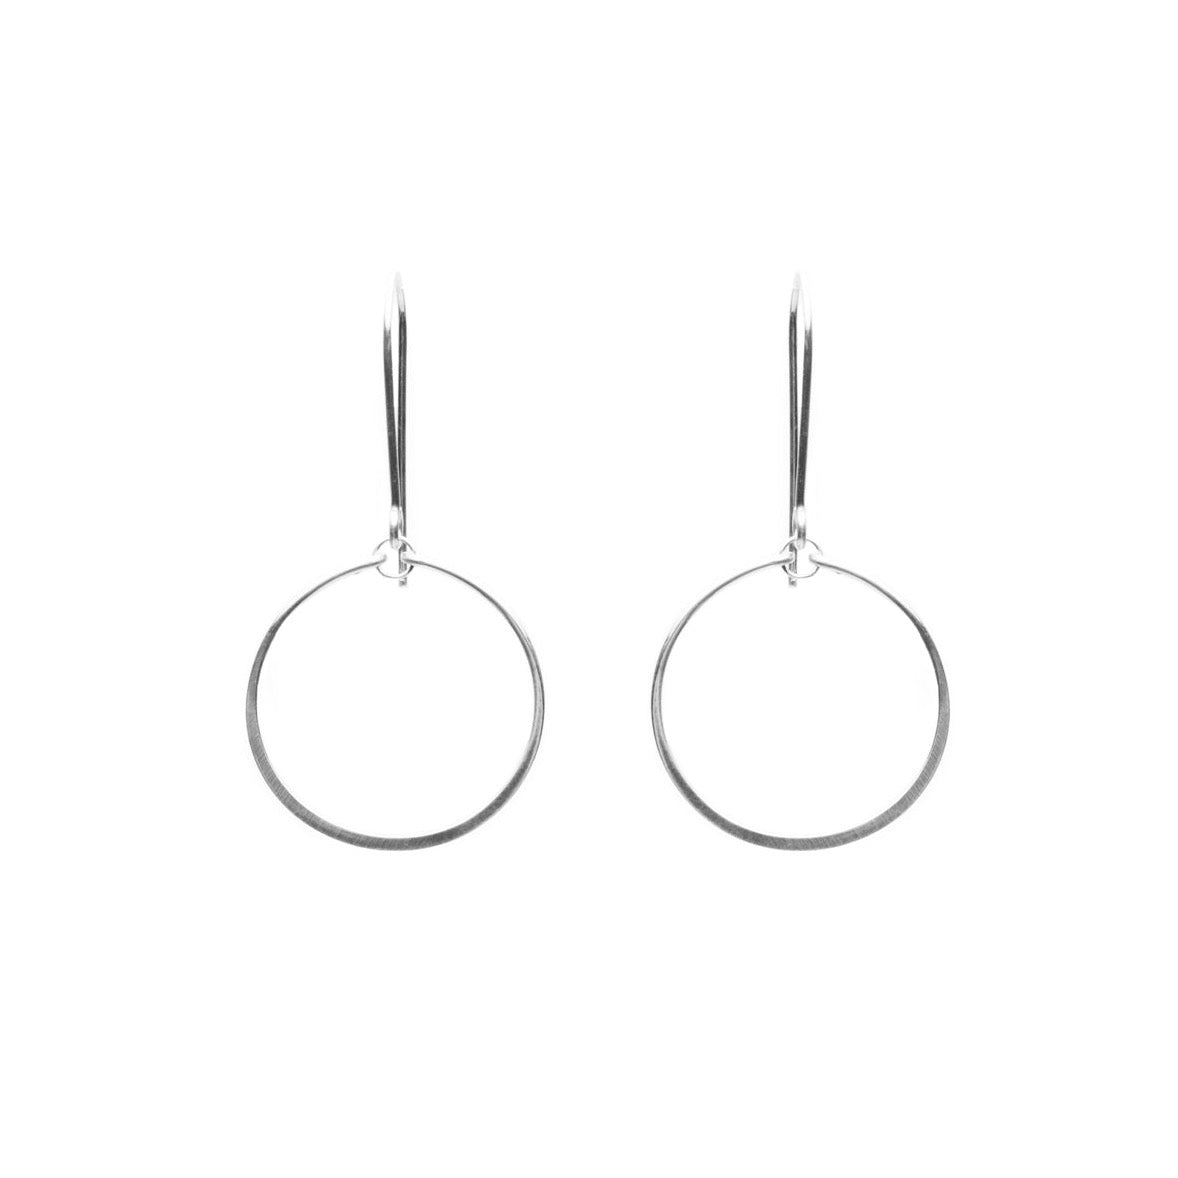 Delicate drop circle earrings formed out of sterling silver wire. Designed and handmade by Amy Olson in Portland, OR.